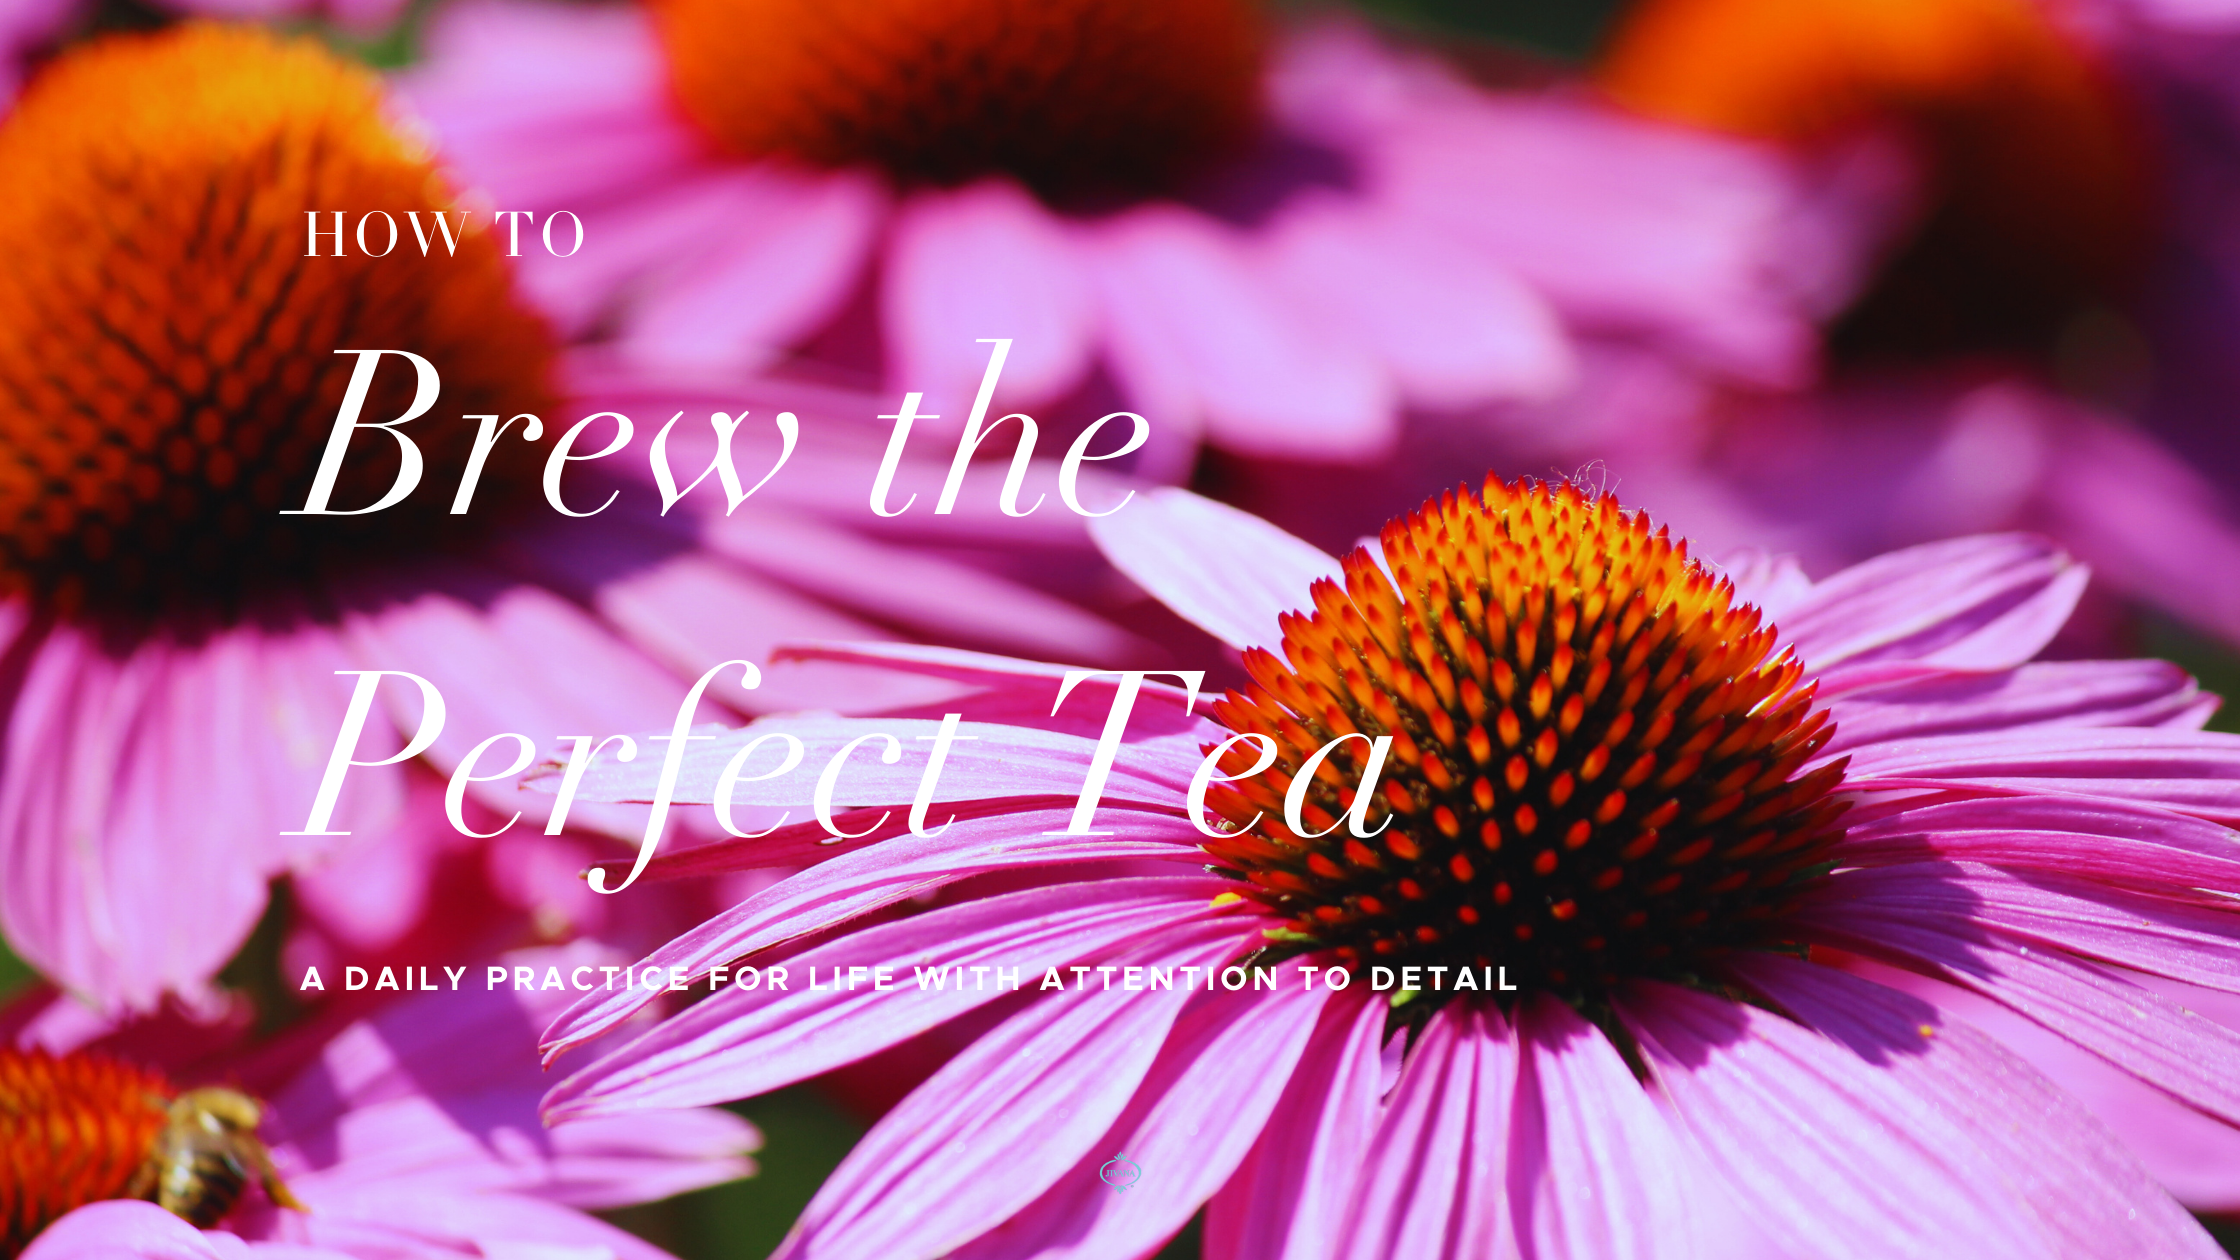 How to brew the perfect tea